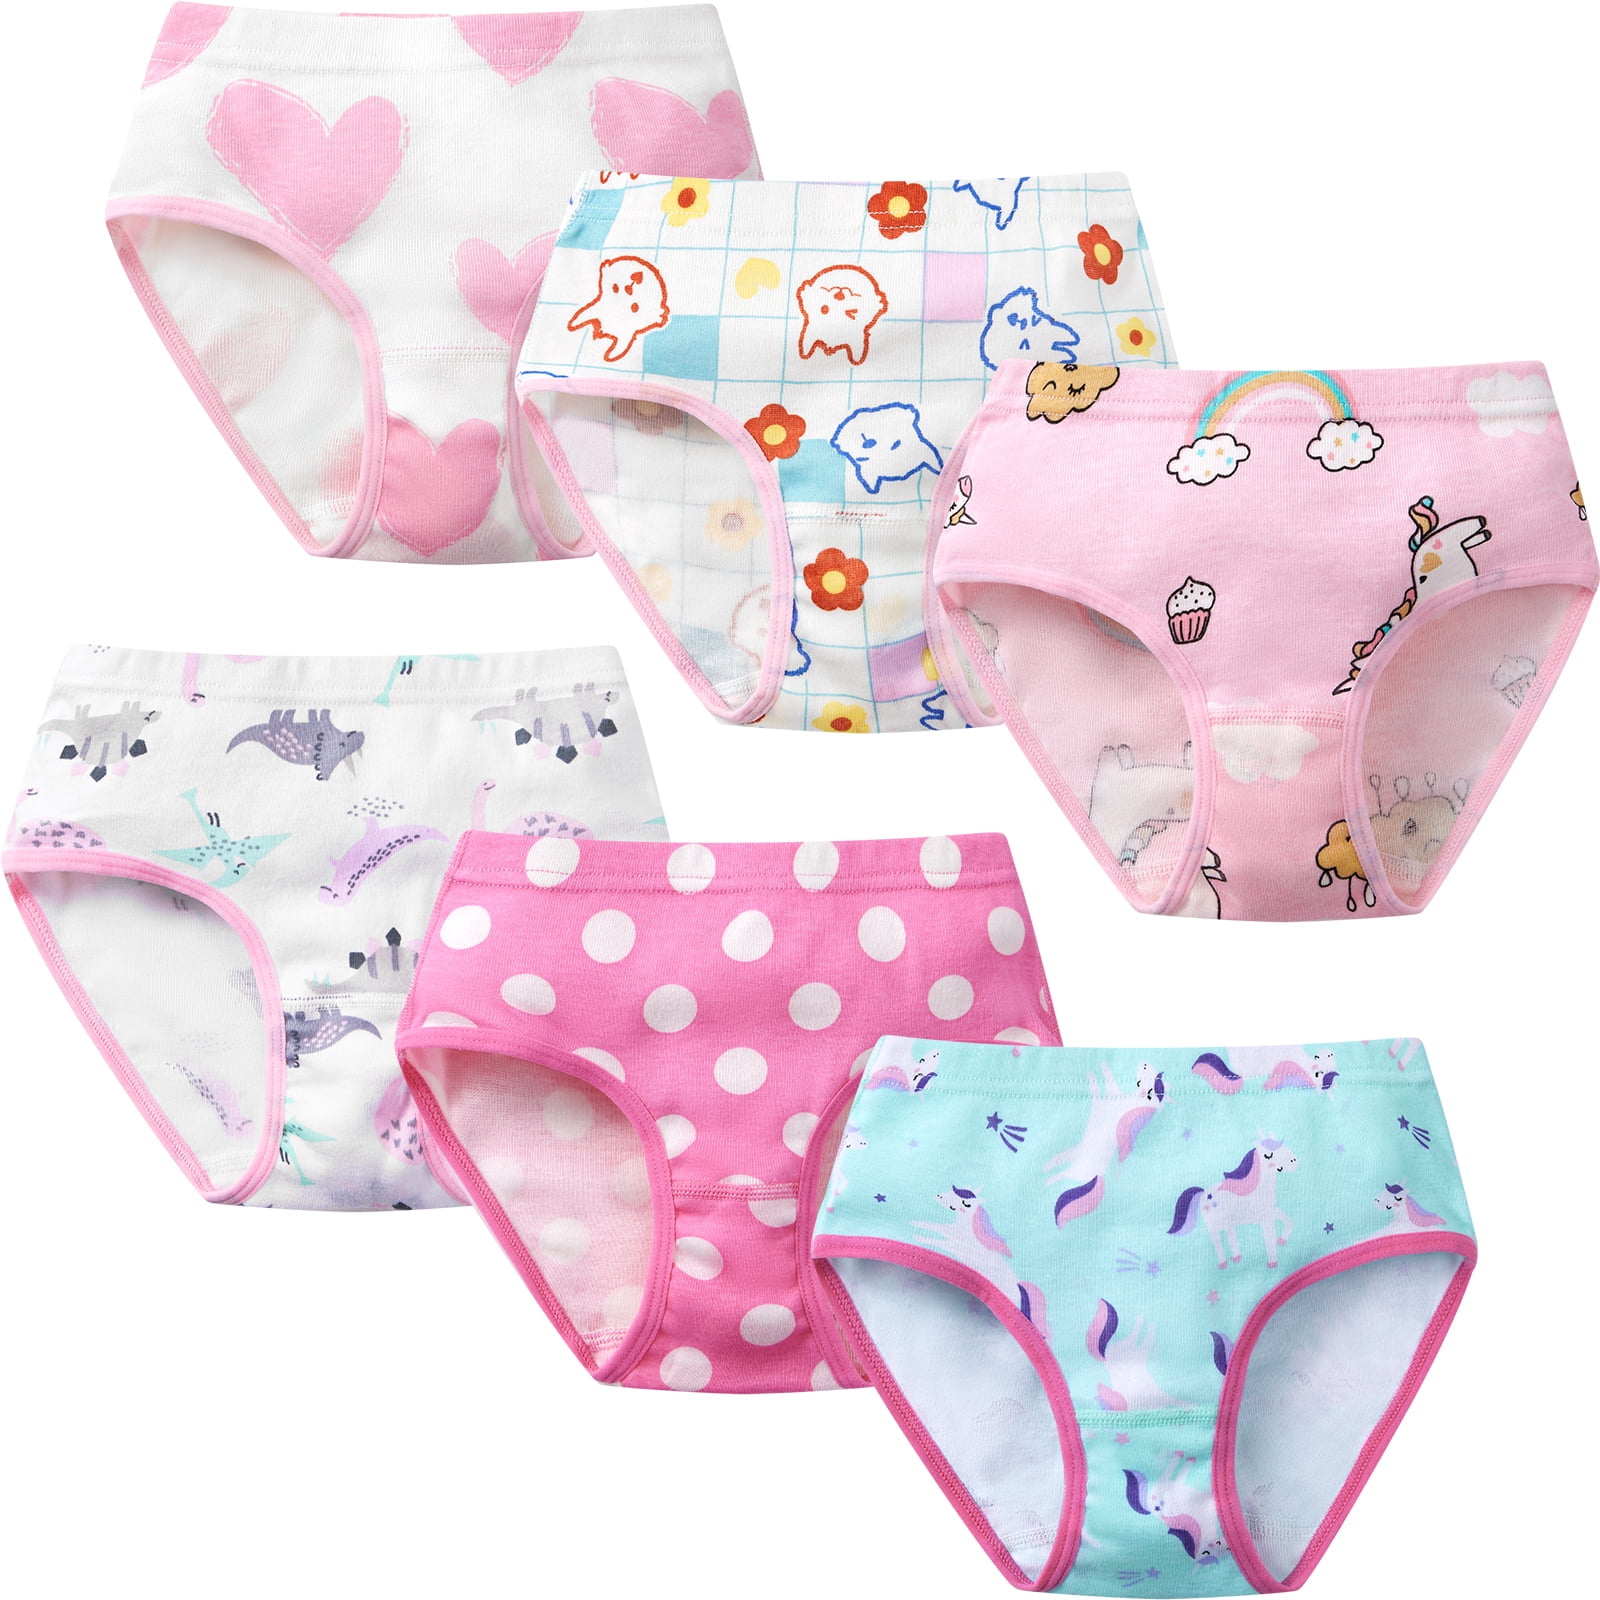 Soft Cotton Briefs for Girls 1-10 Years - Pack of 6